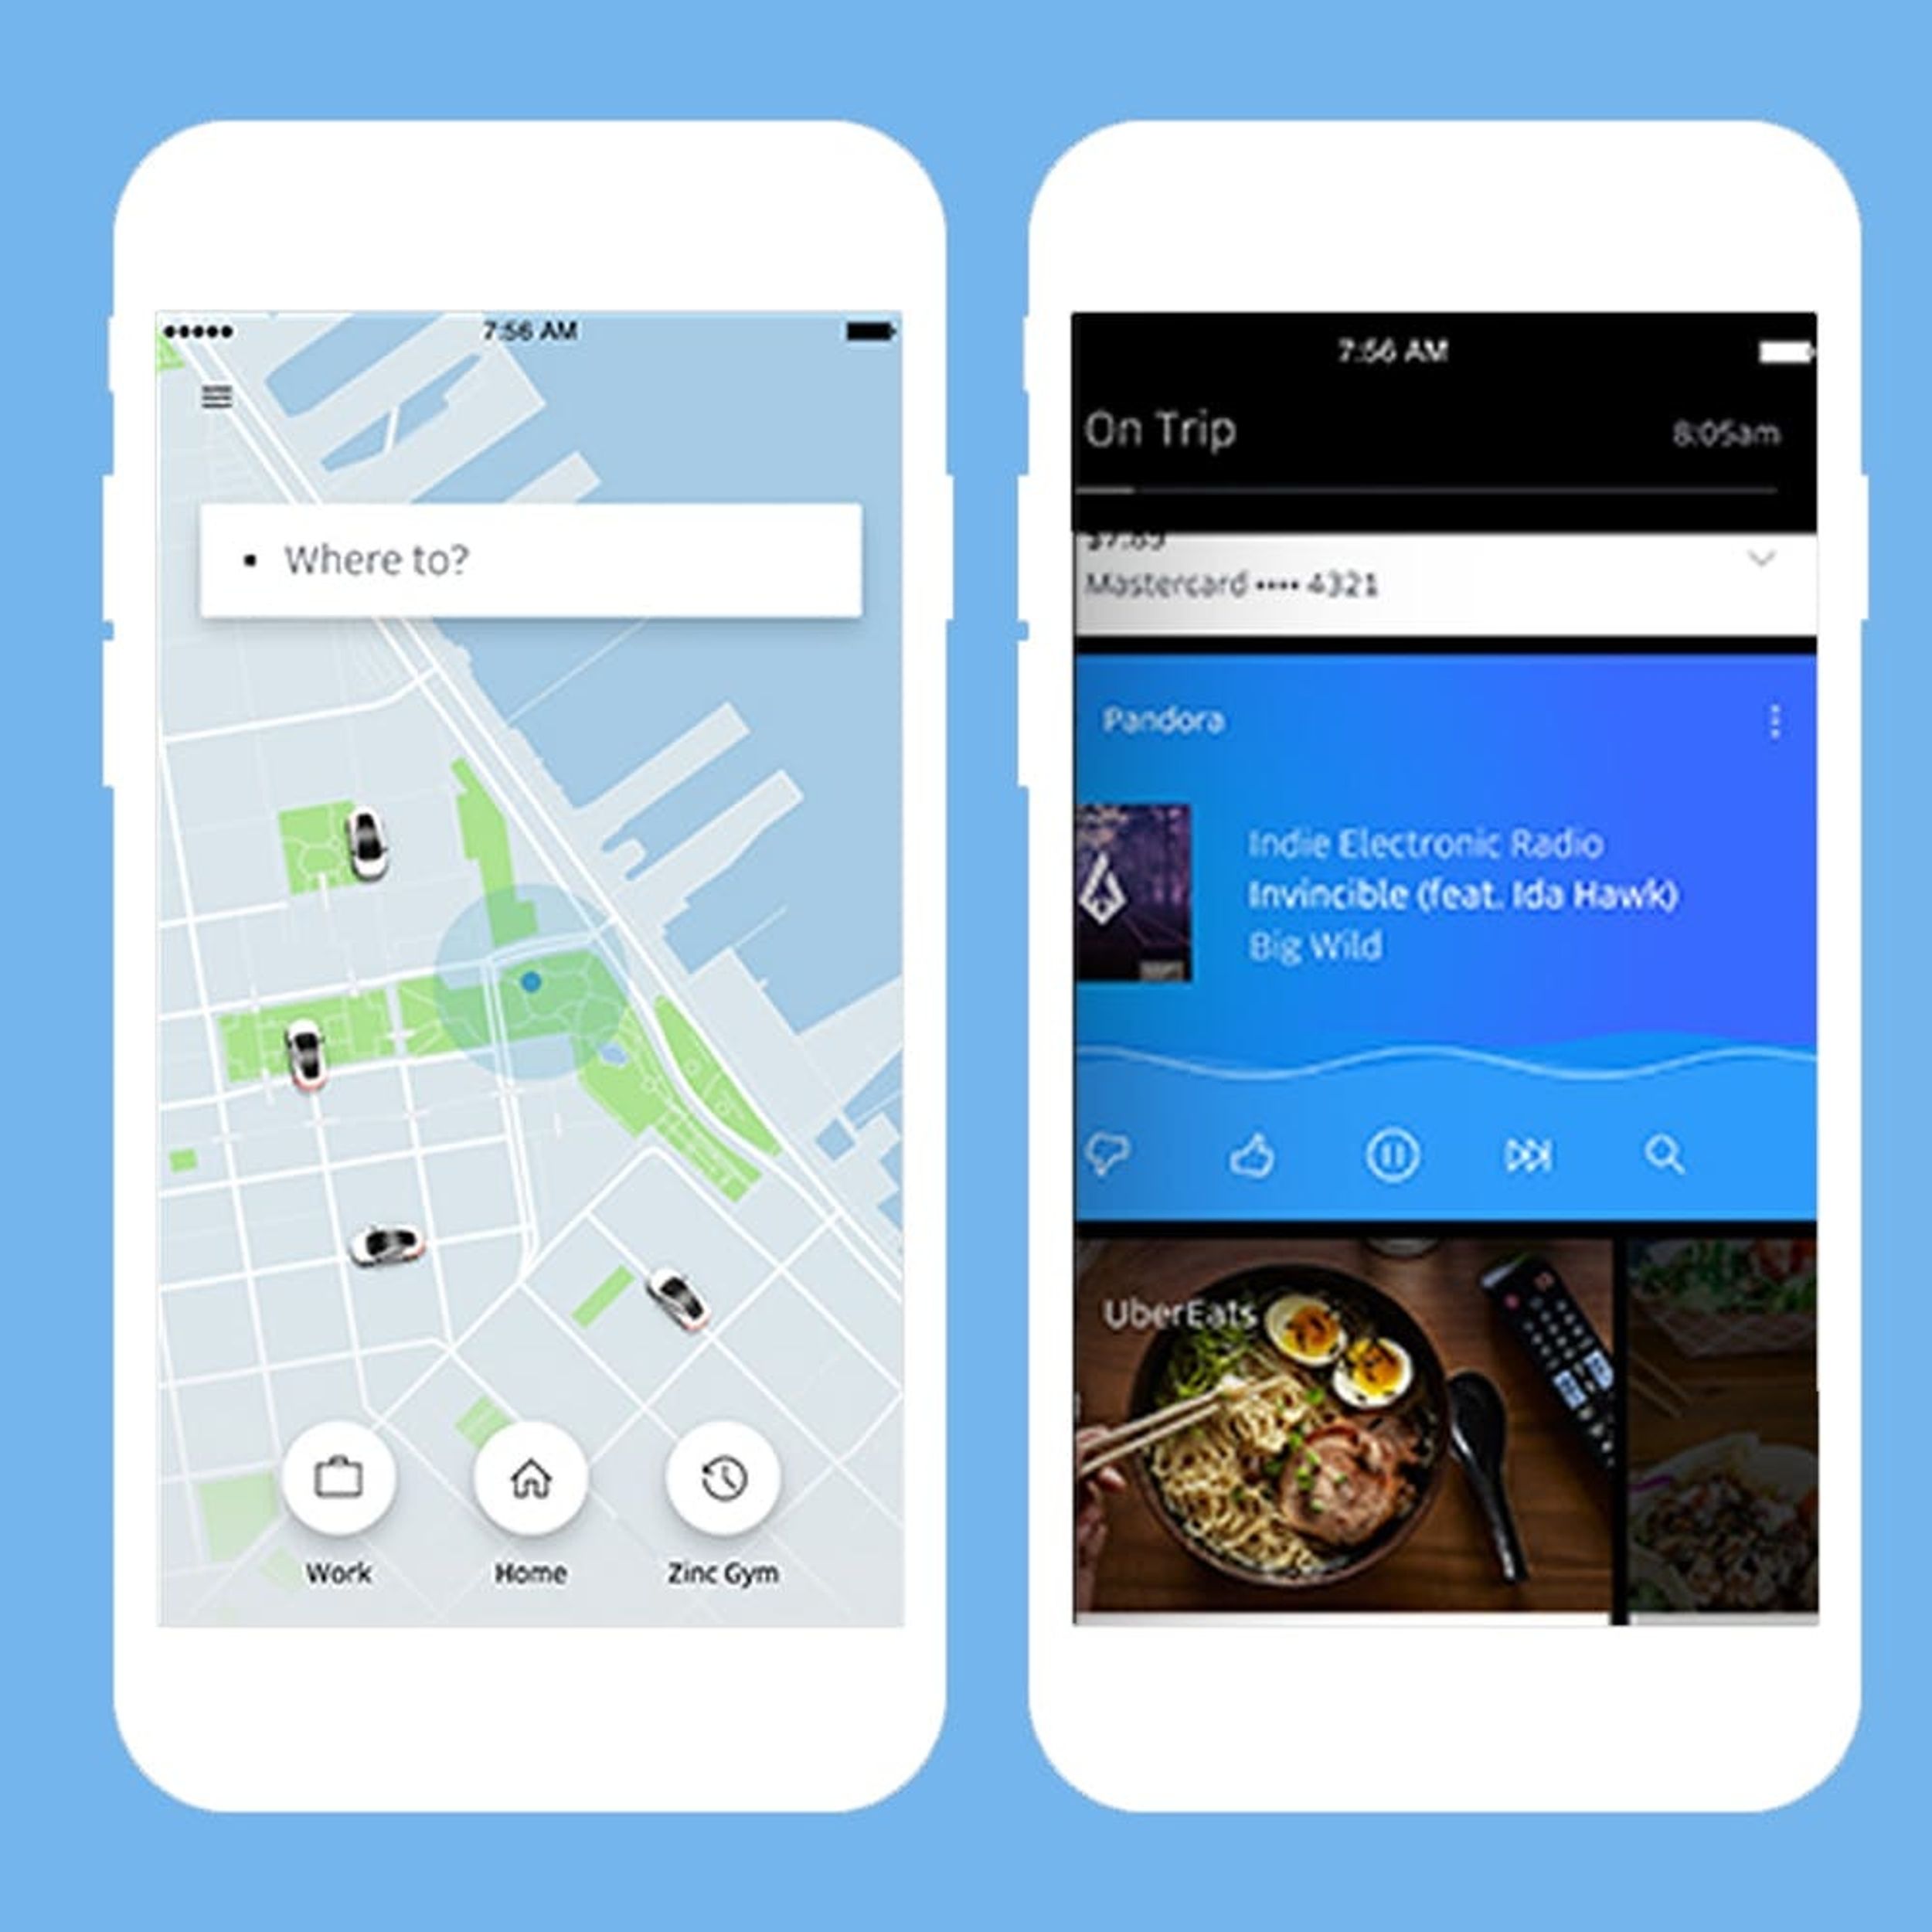 Uber’s Got a Brand New Look + 4 More Apps to DL